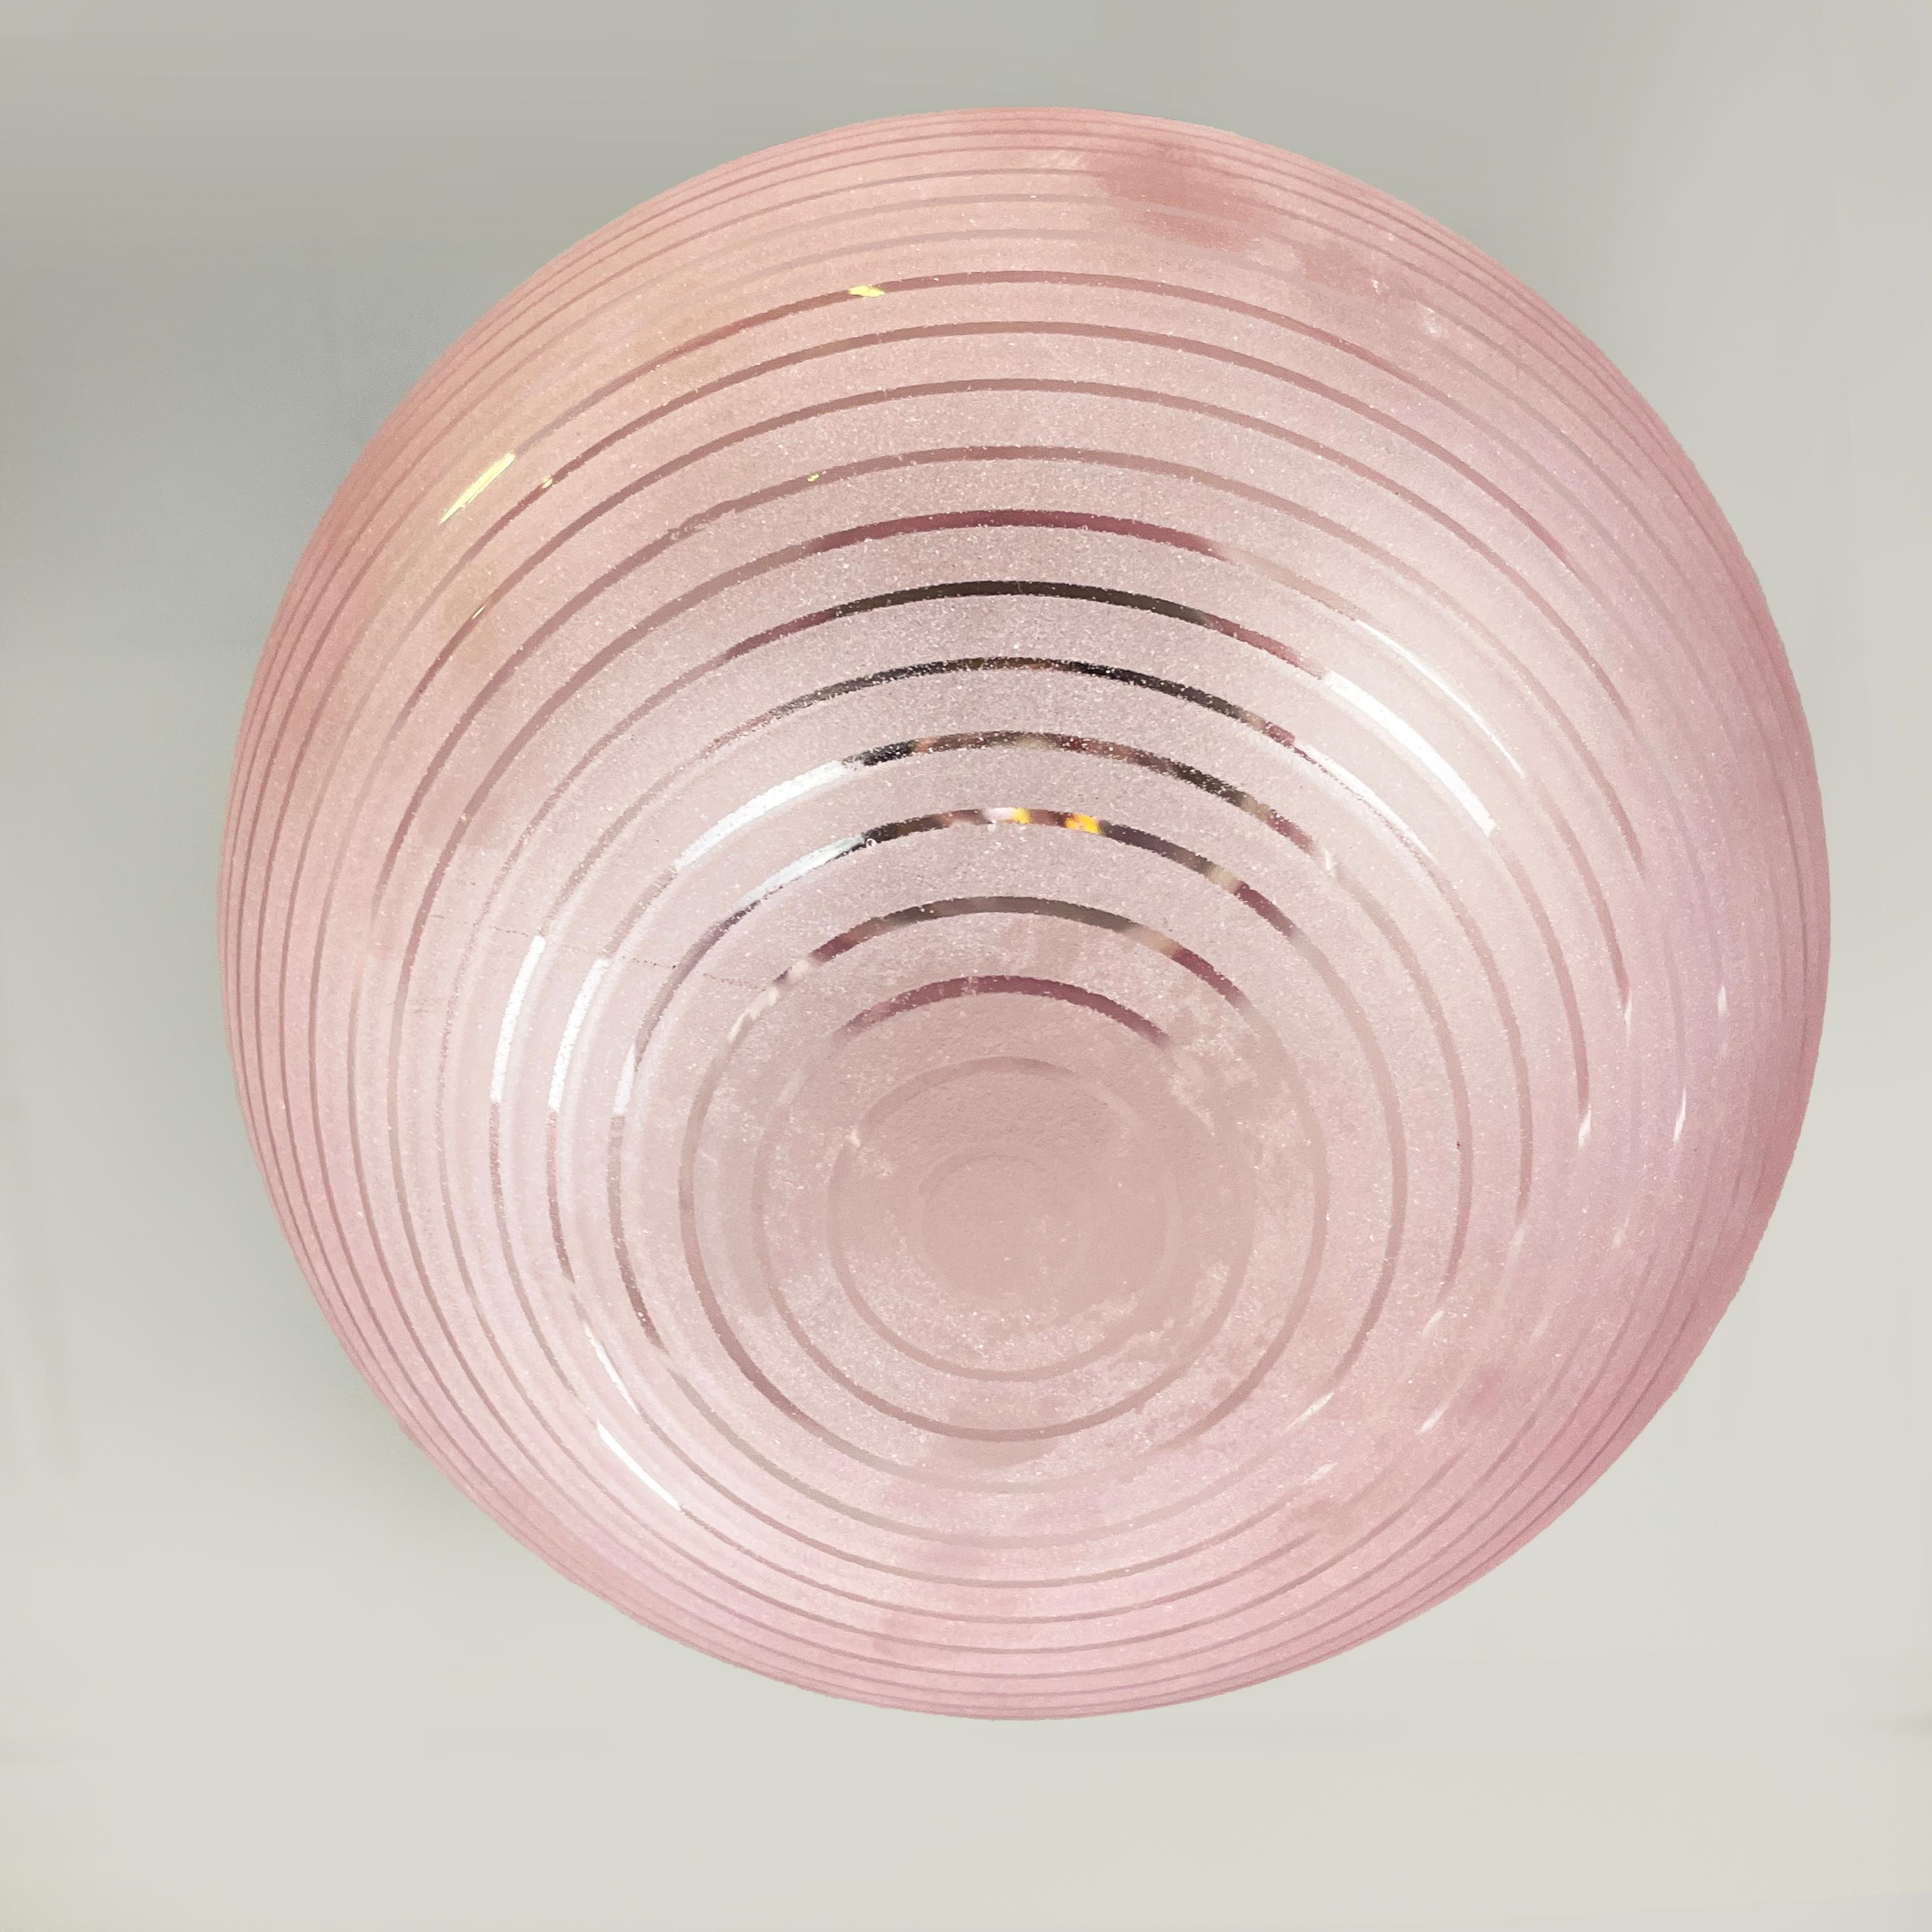 Metal Italian mid-century modern Ceiling lamp in pink glass and metal, 1940s